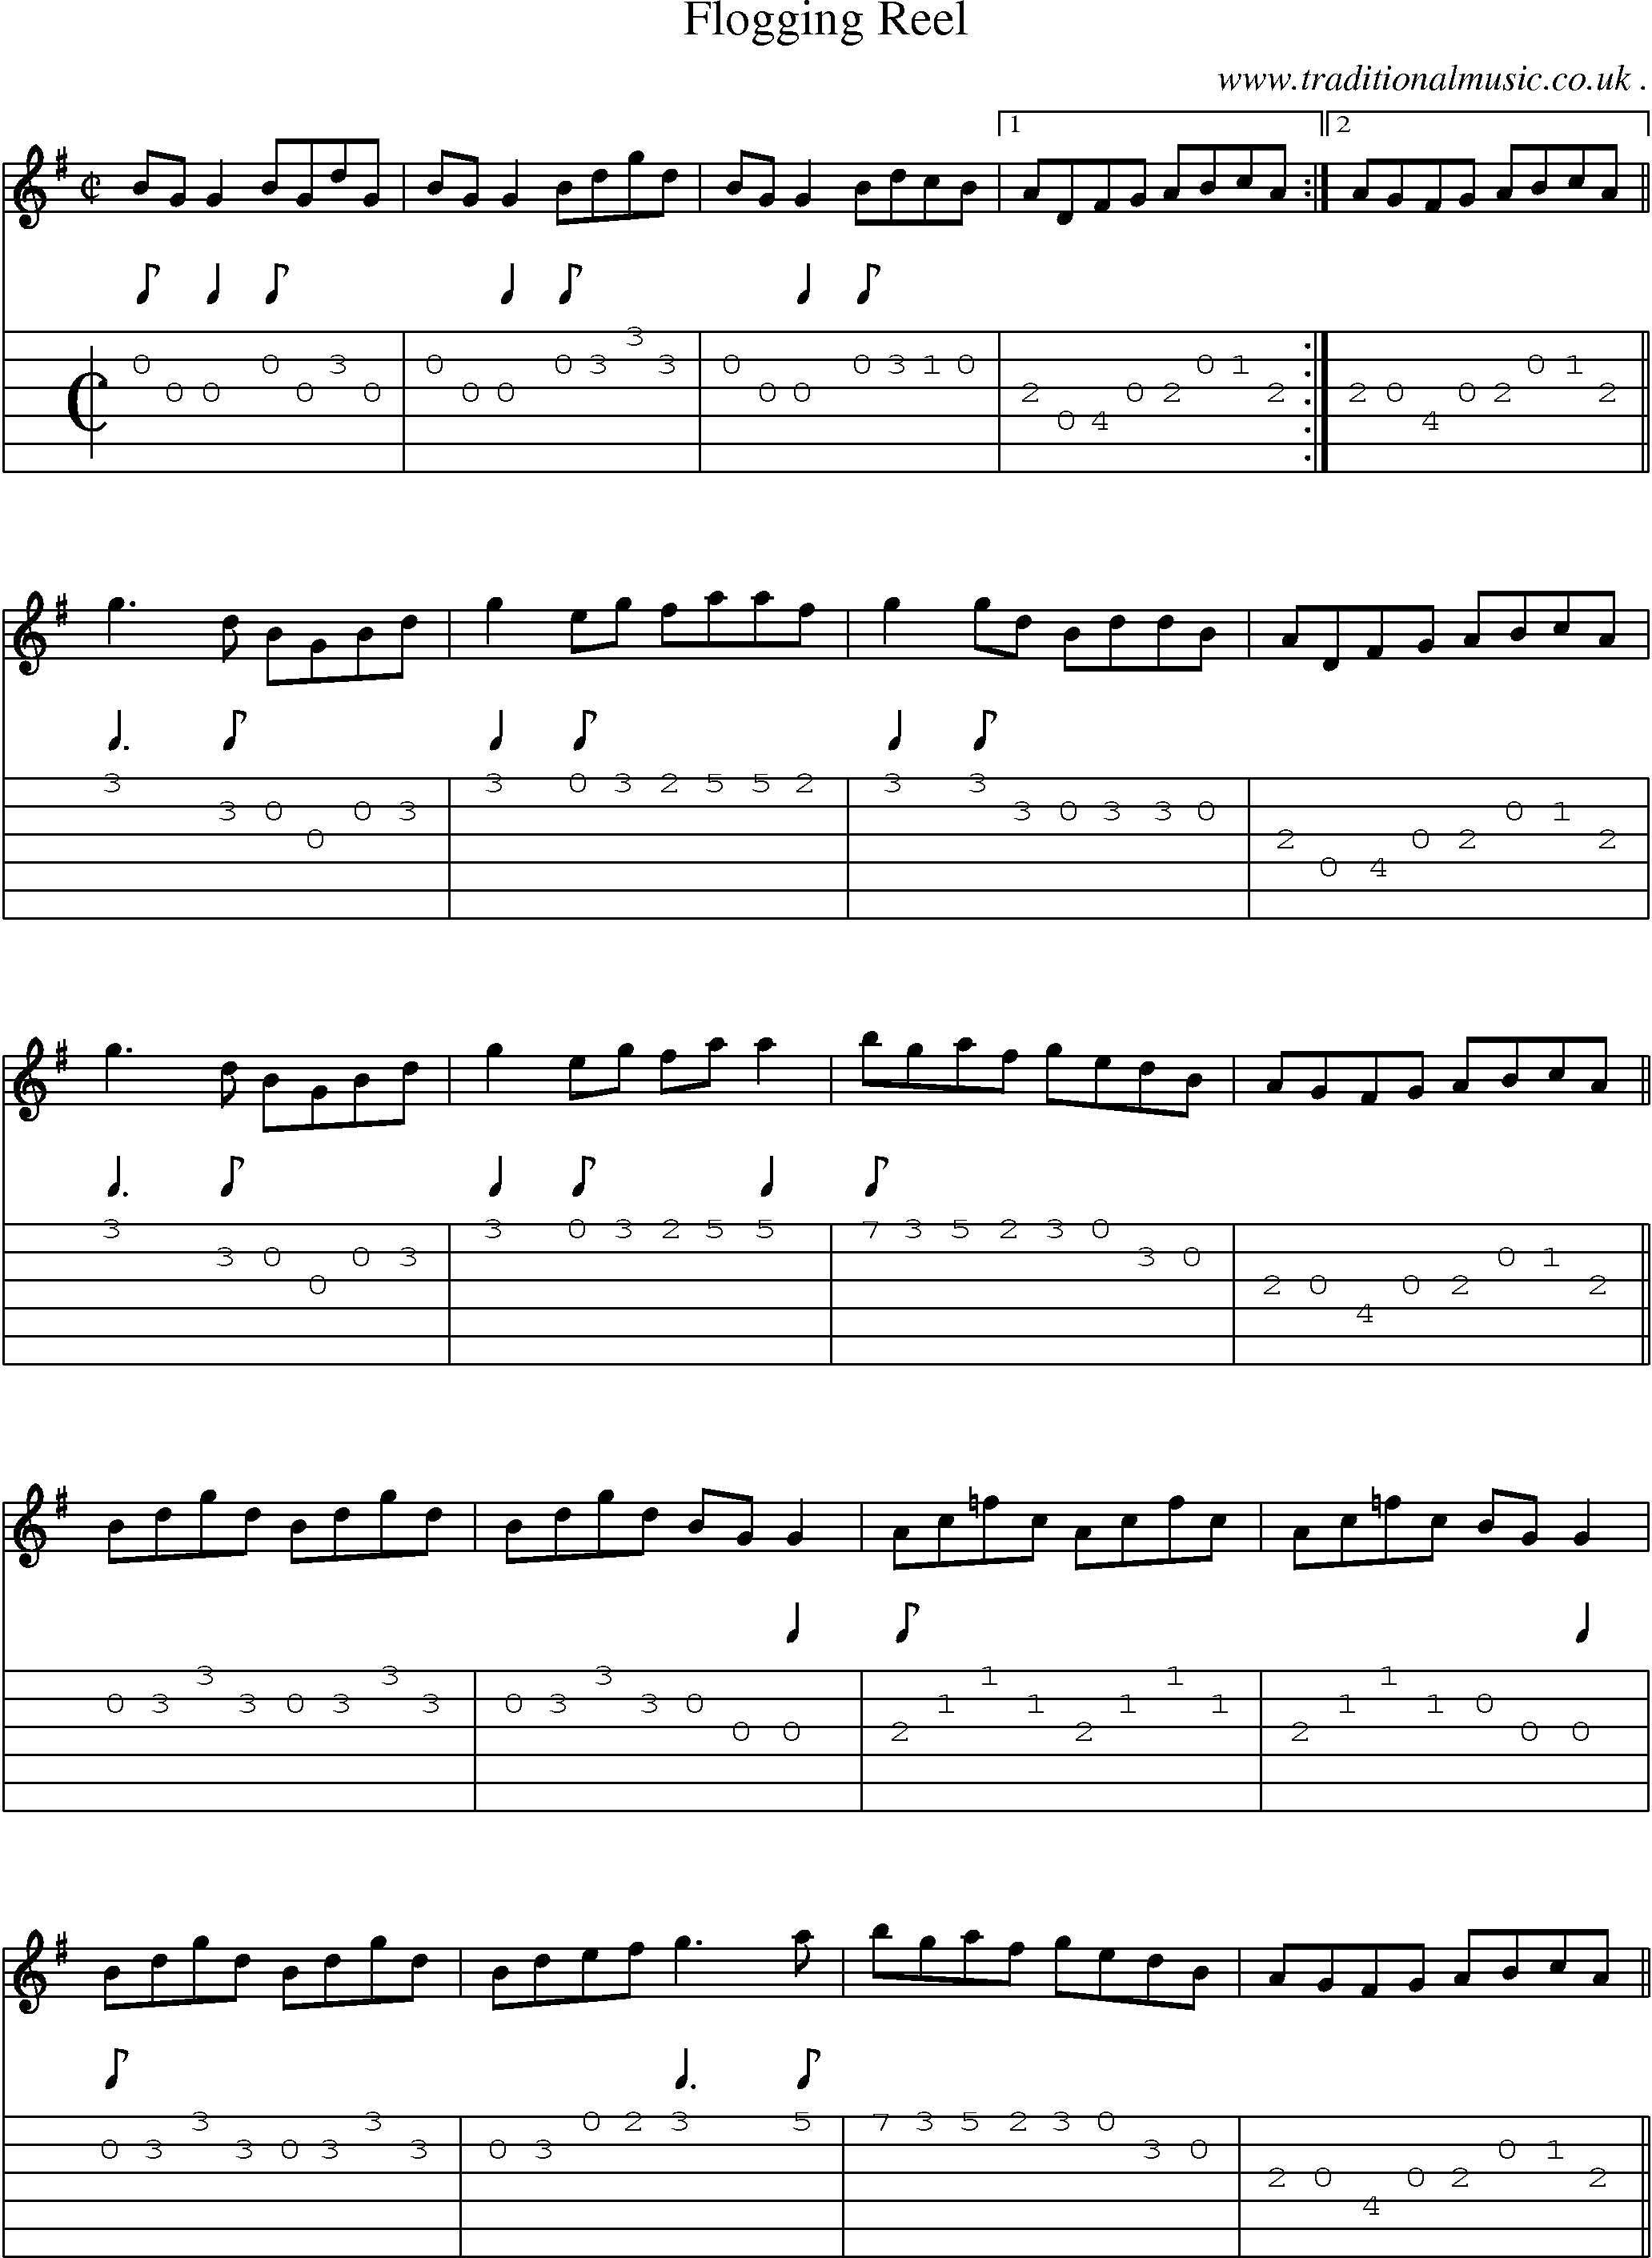 Sheet-Music and Guitar Tabs for Flogging Reel